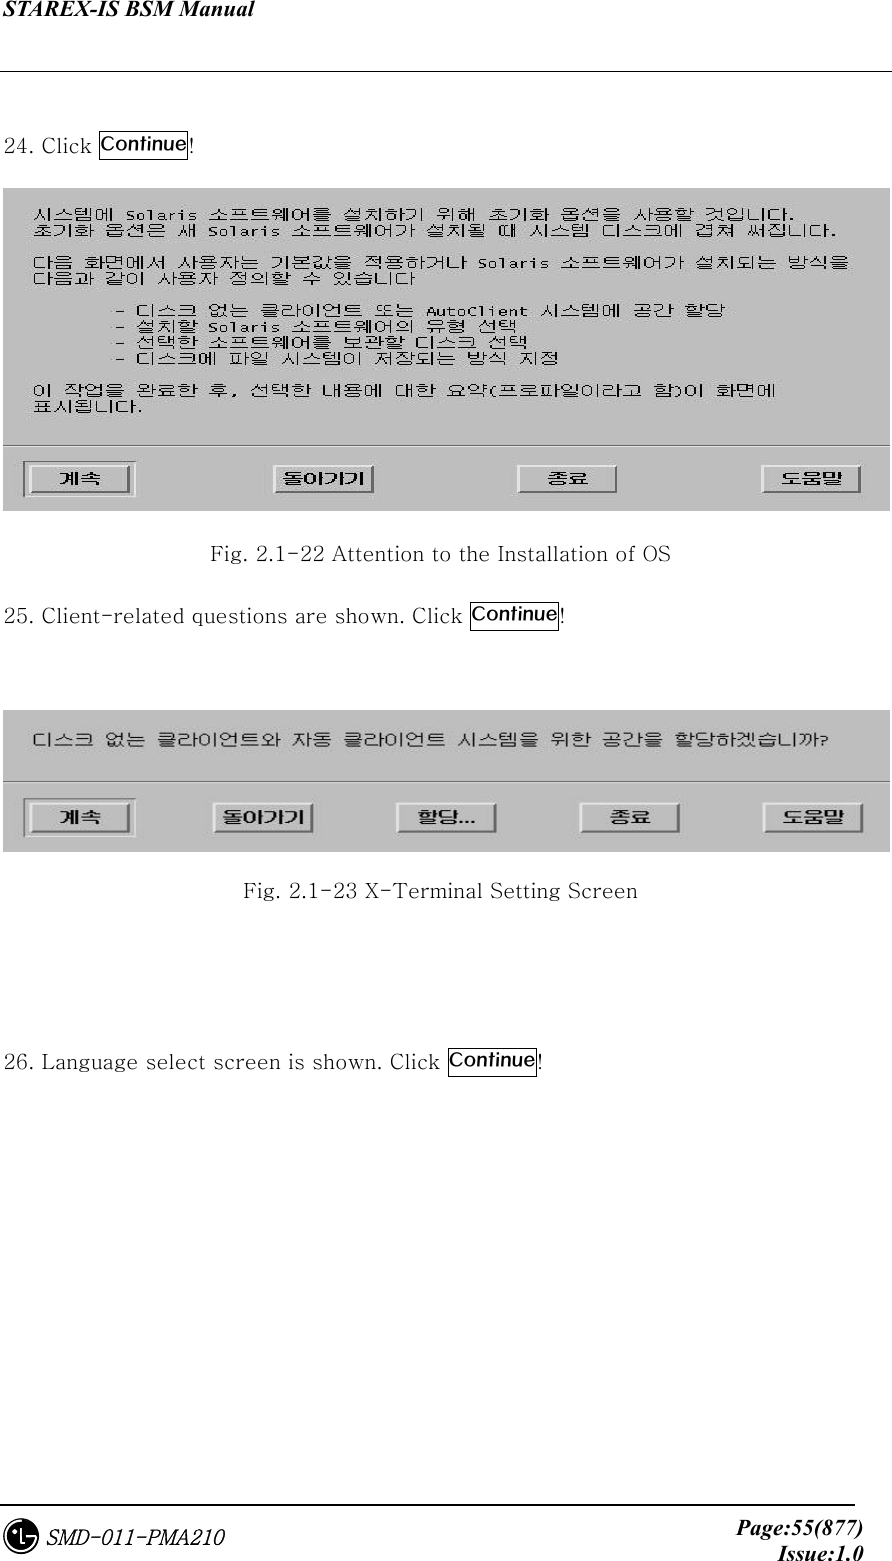 STAREX-IS BSM Manual     Page:55(877)Issue:1.0SMD-011-PMA210  24. Click Continue!  Fig. 2.1-22 Attention to the Installation of OS   25. Client-related questions are shown. Click Continue!   Fig. 2.1-23 X-Terminal Setting Screen   26. Language select screen is shown. Click Continue! 